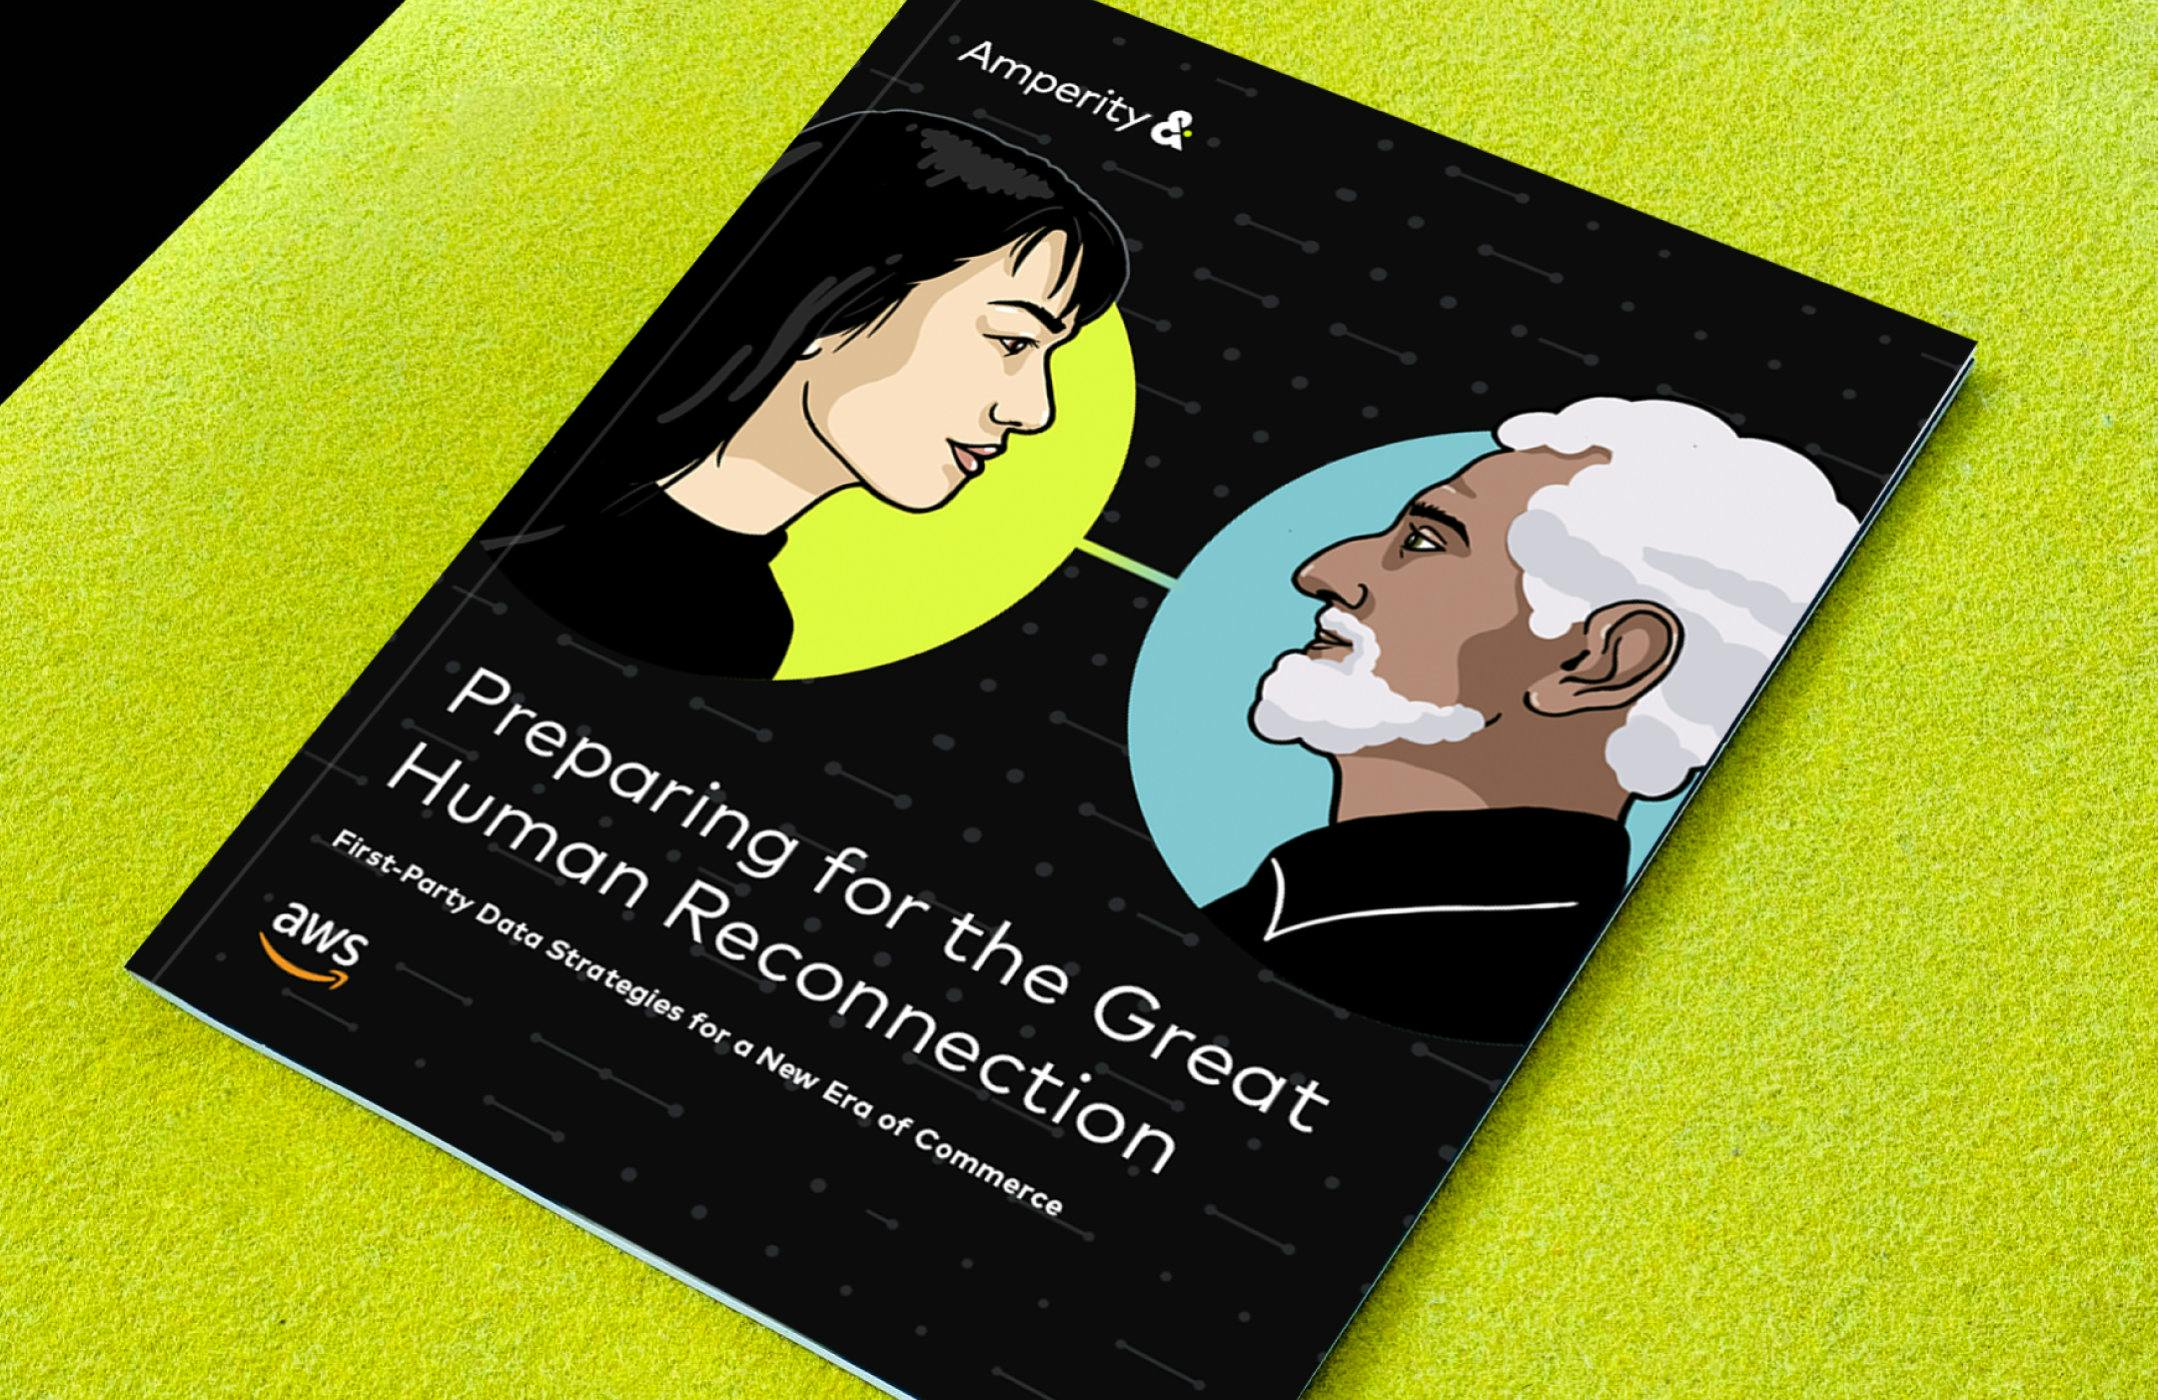 Image of booklet titled Preparing for the Great Human Reconnection